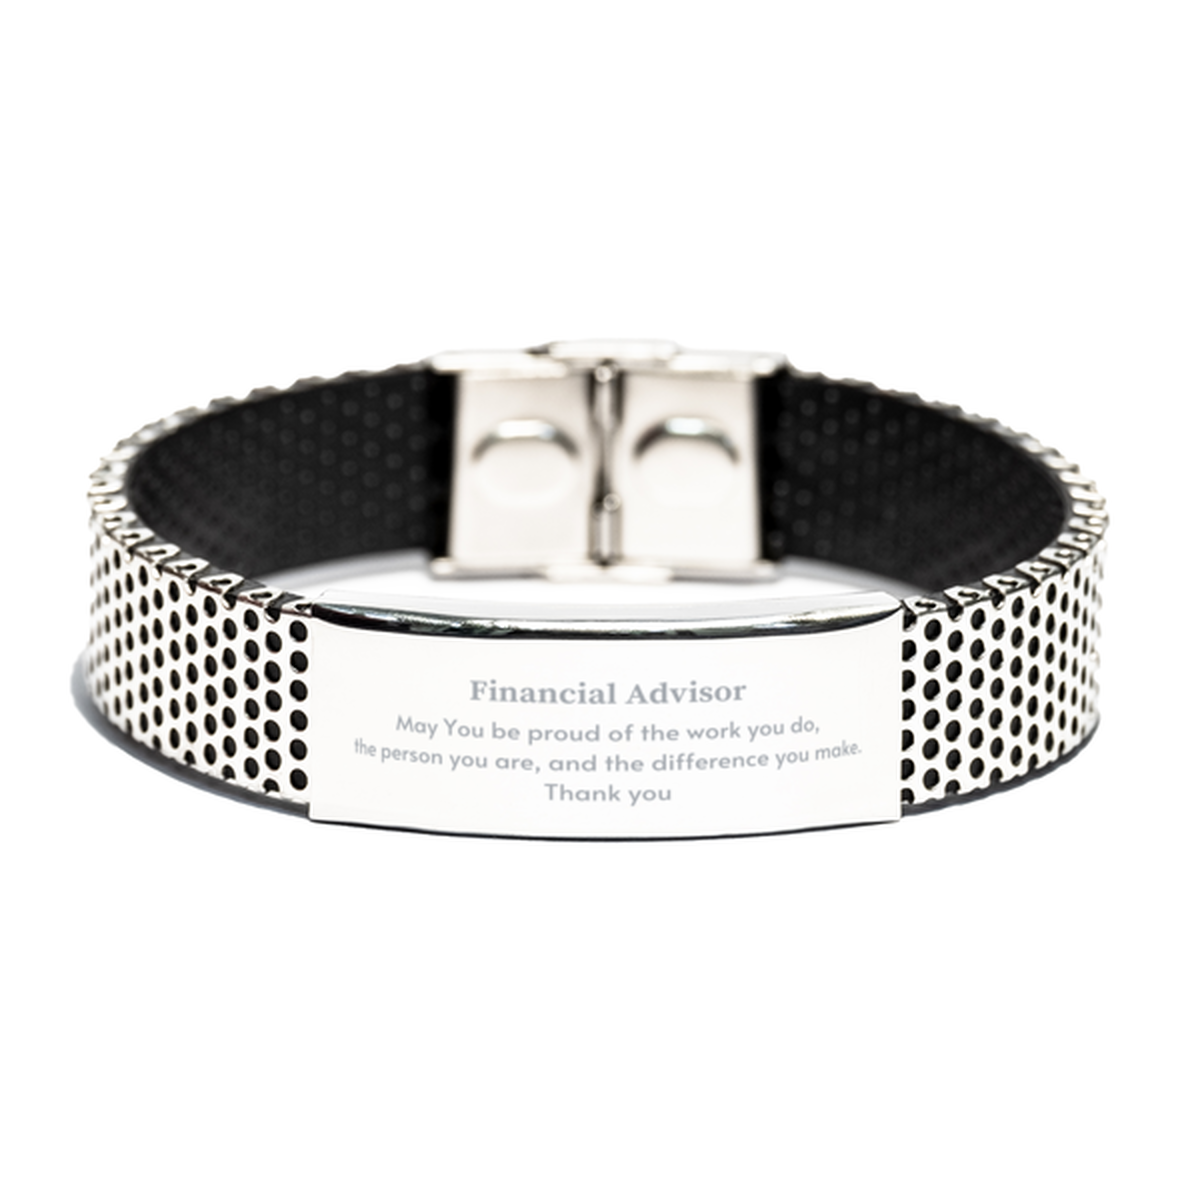 Heartwarming Stainless Steel Bracelet Retirement Coworkers Gifts for Financial Advisor, Financial Advisor May You be proud of the work you do, the person you are Gifts for Boss Men Women Friends